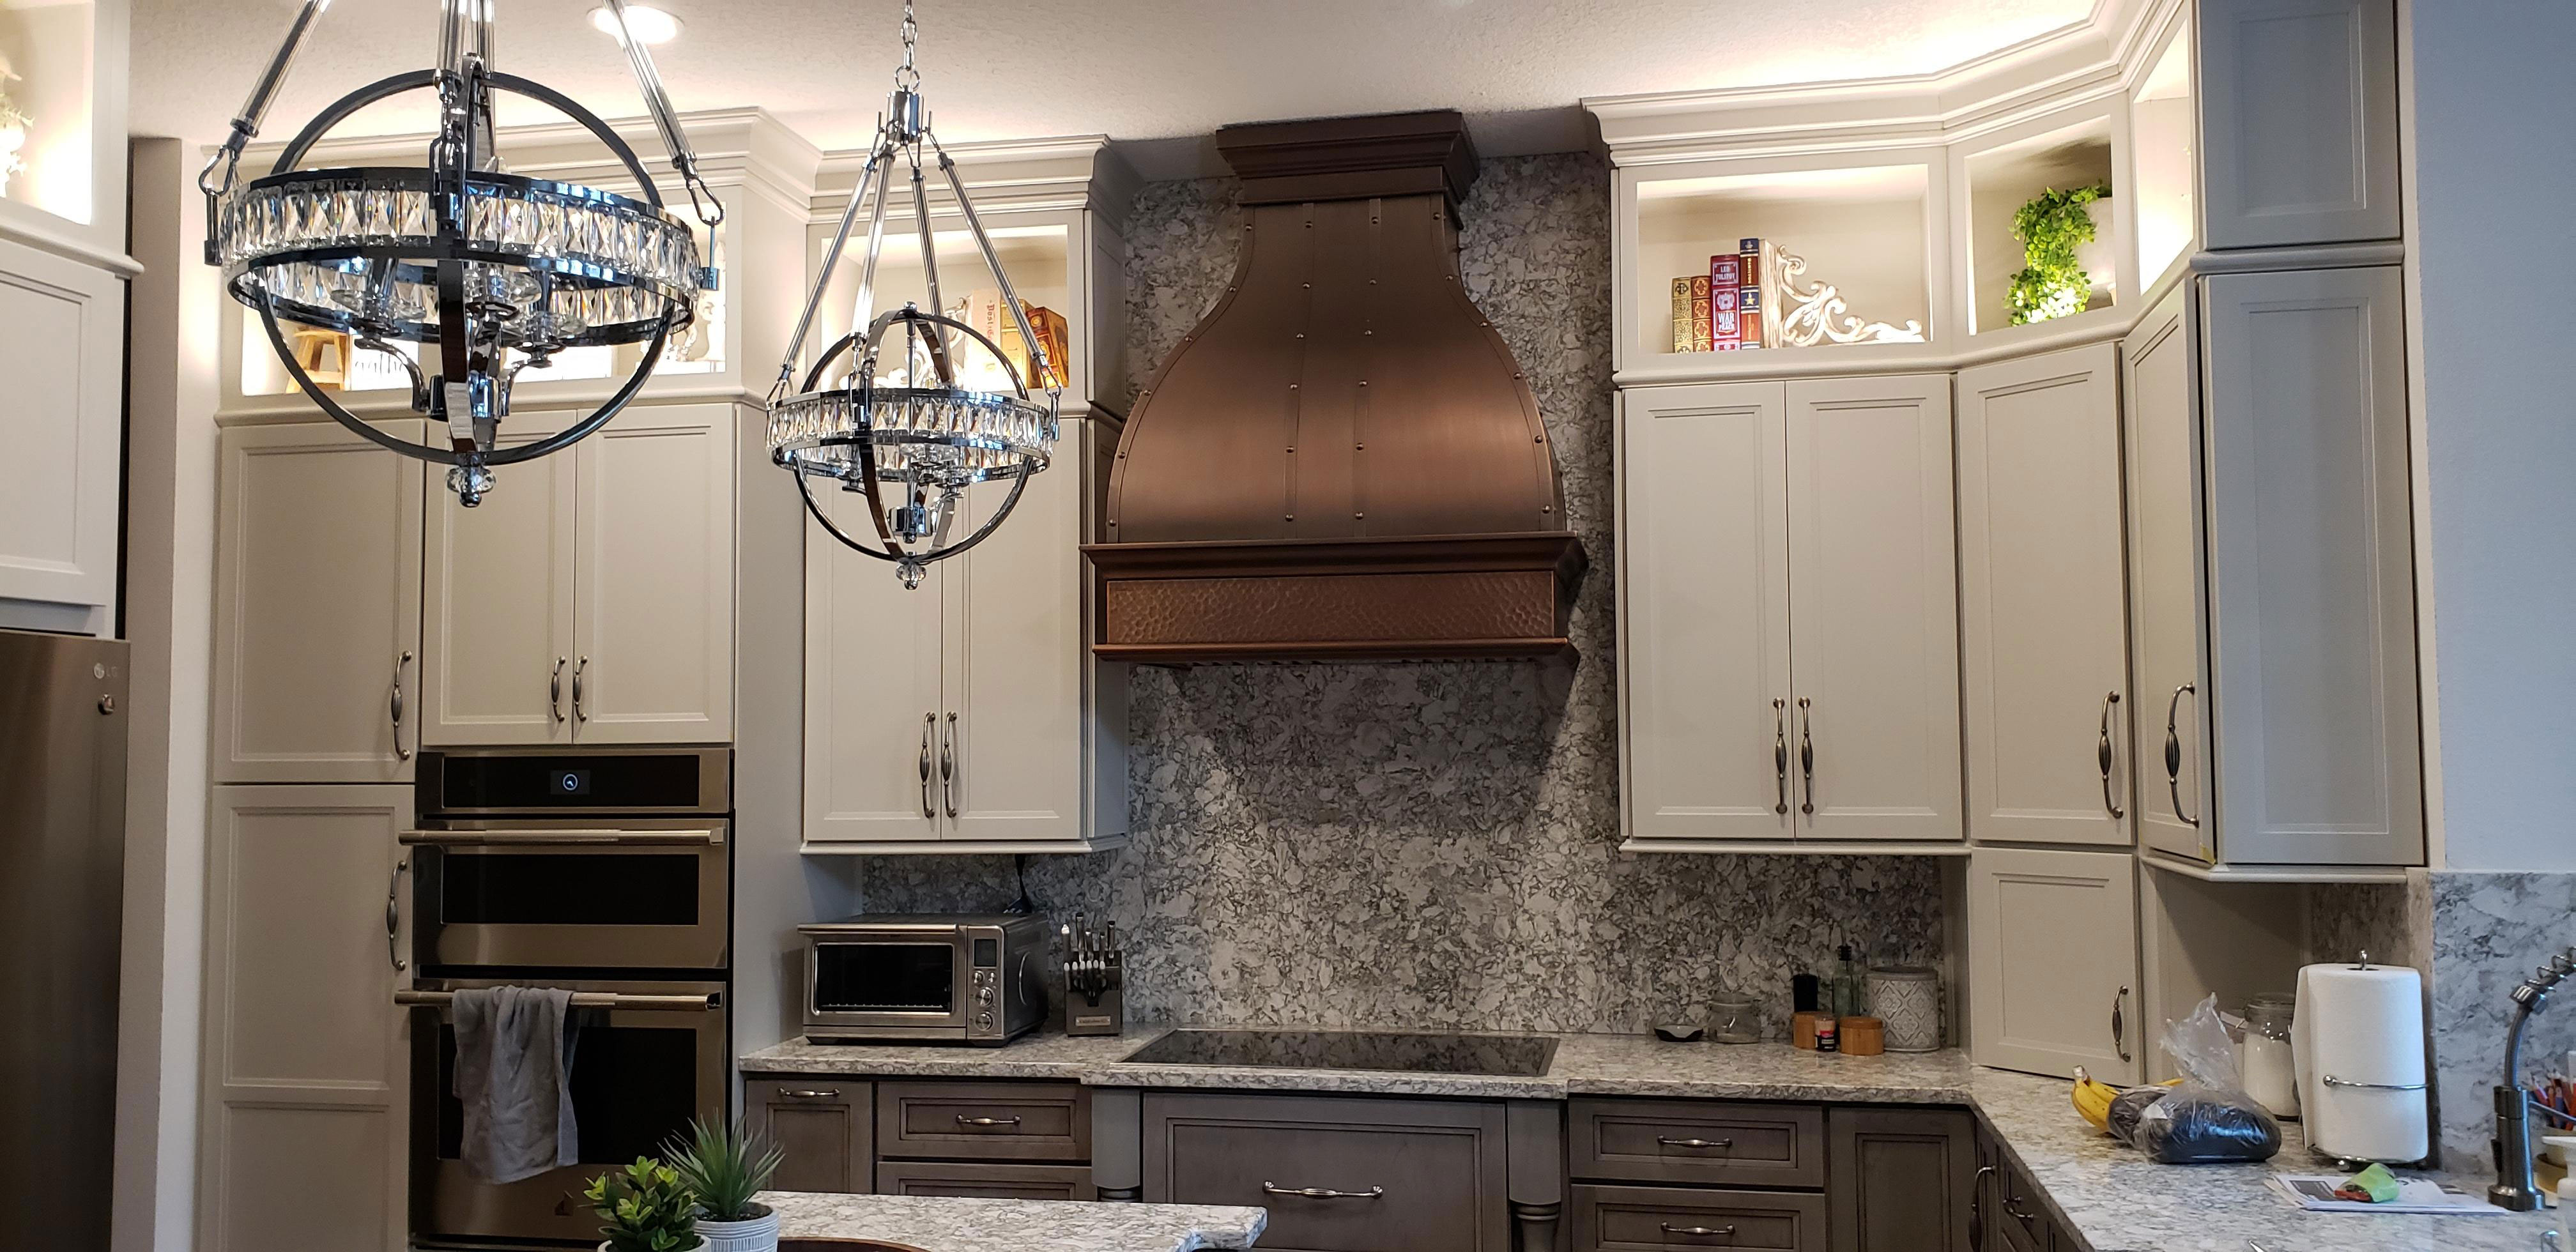 Copper hood attached to wall and ceiling with a round shape World CopperSmith